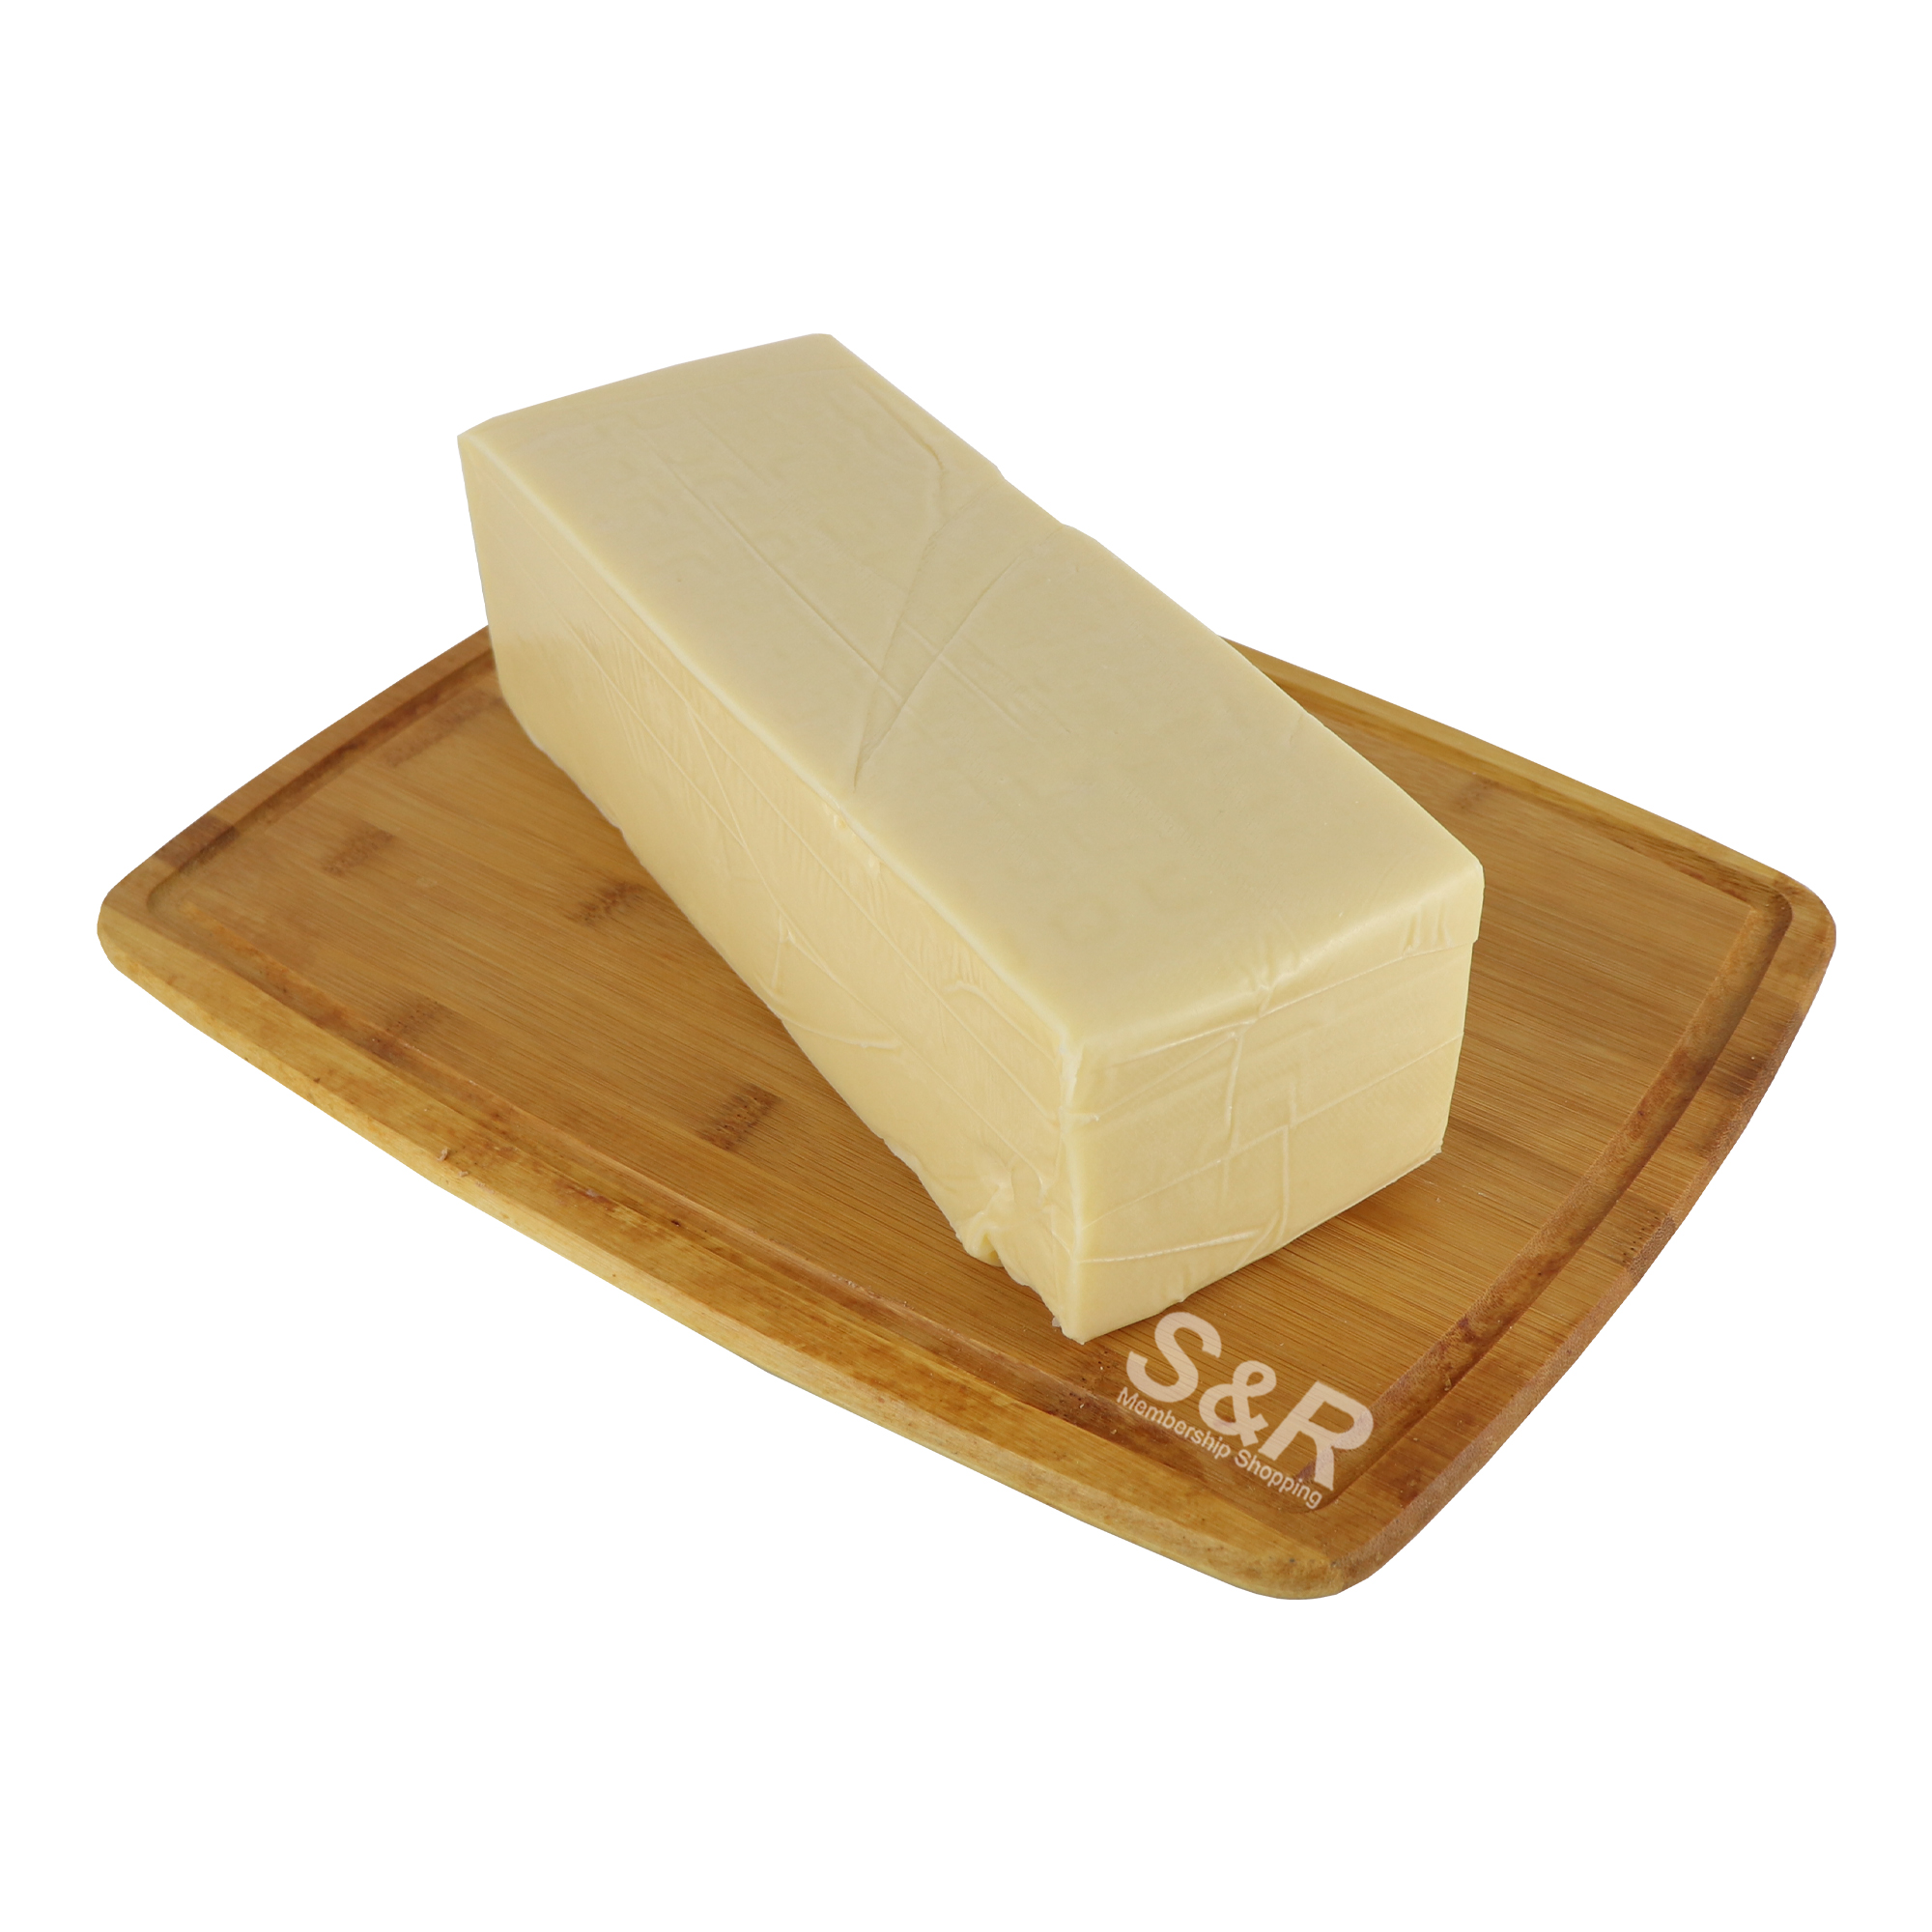 S&R Emmental Italian Cheese approx. 1.5kg